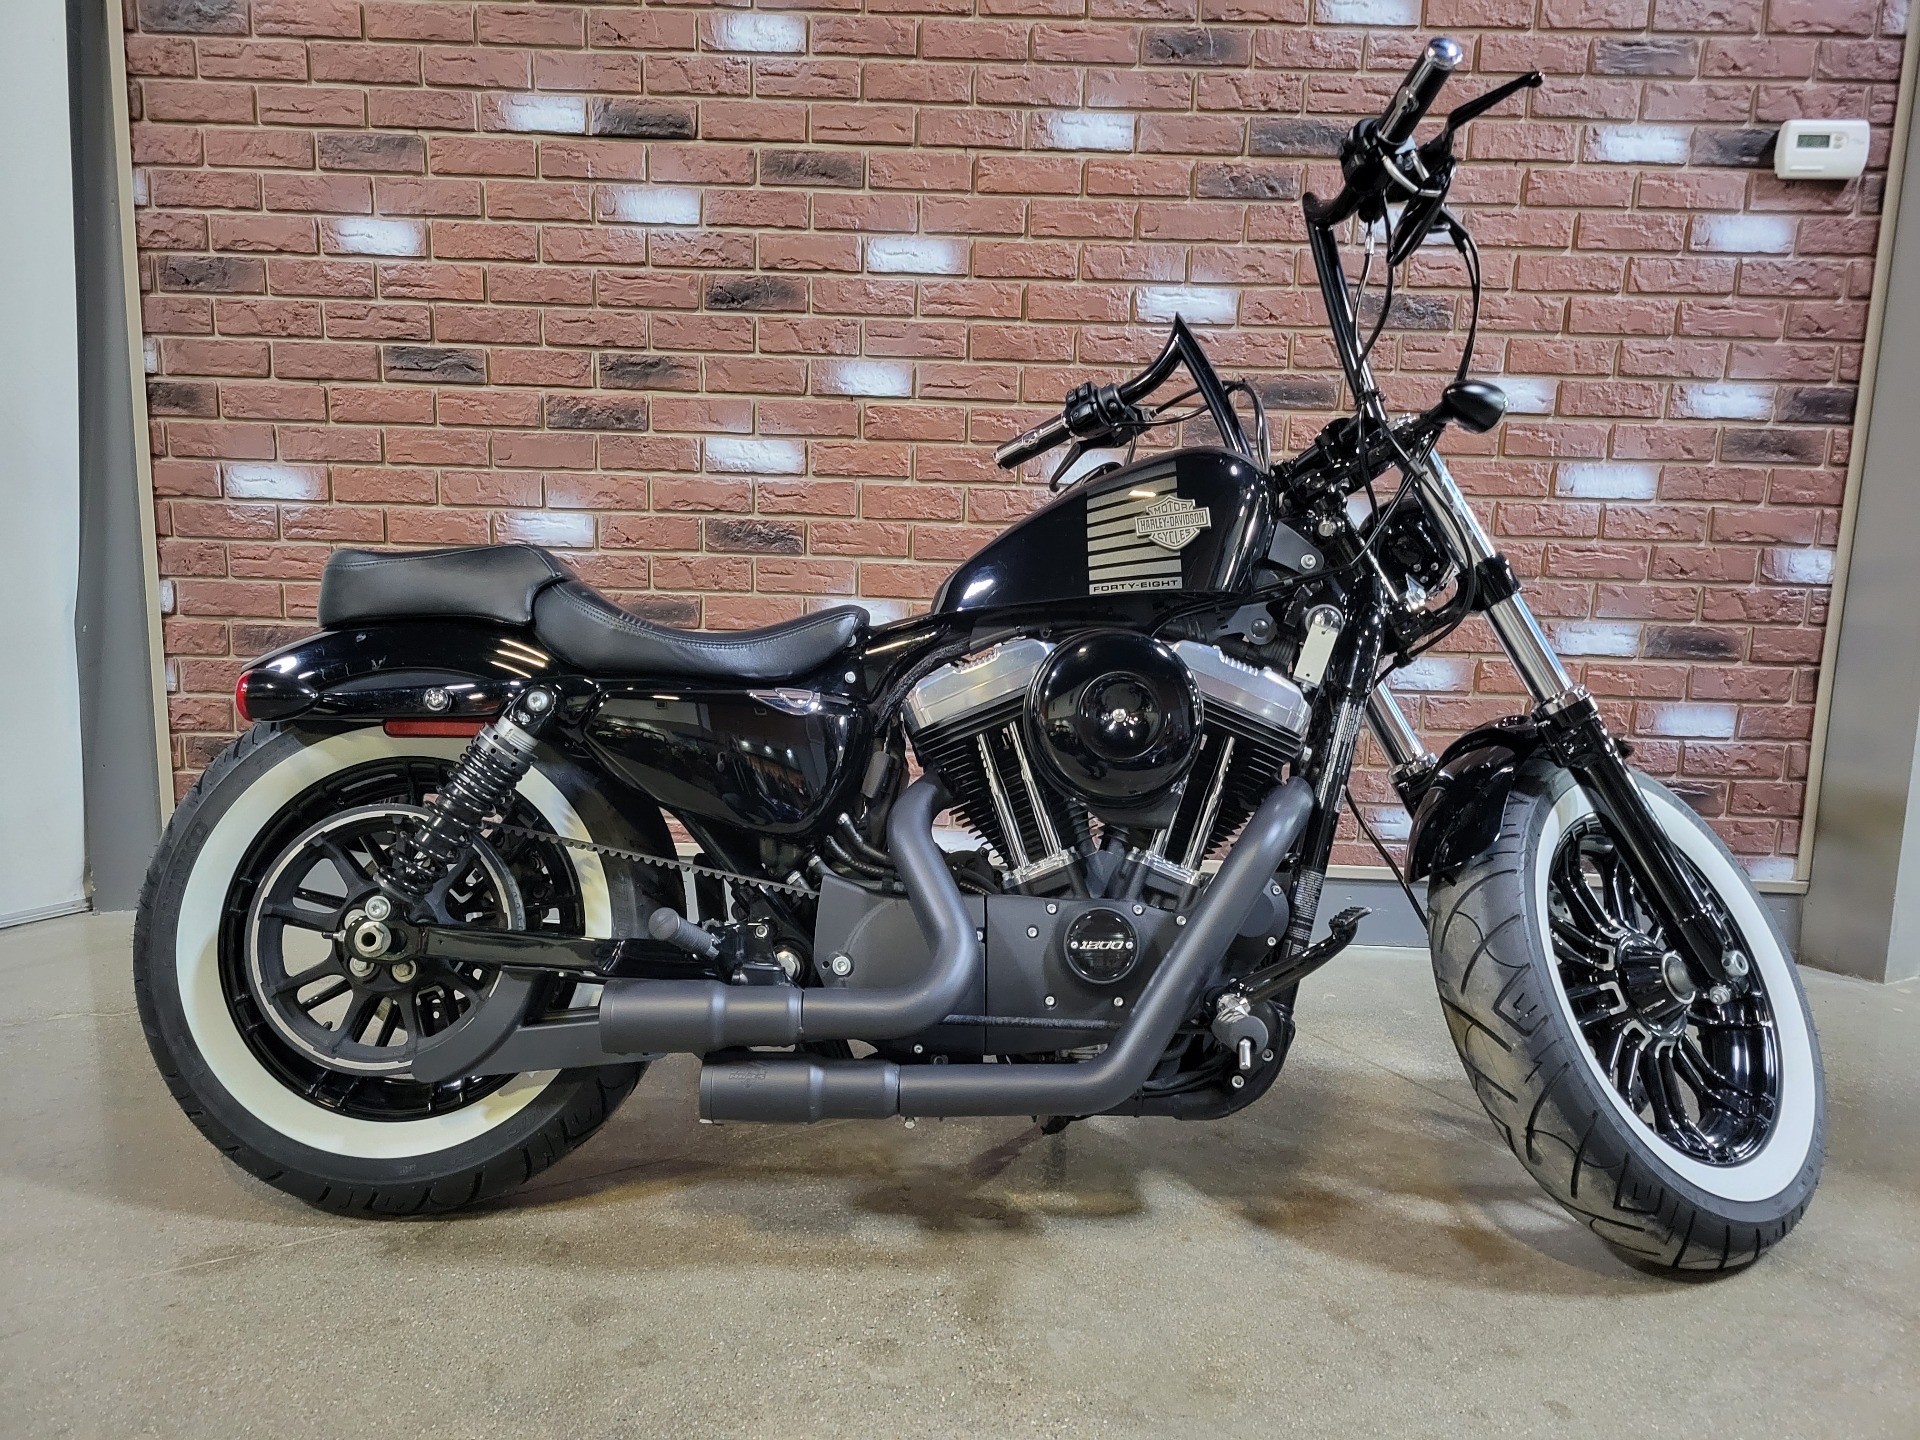 2013 Harley-Davidson Sportster® Forty-Eight® in Dimondale, Michigan - Photo 1